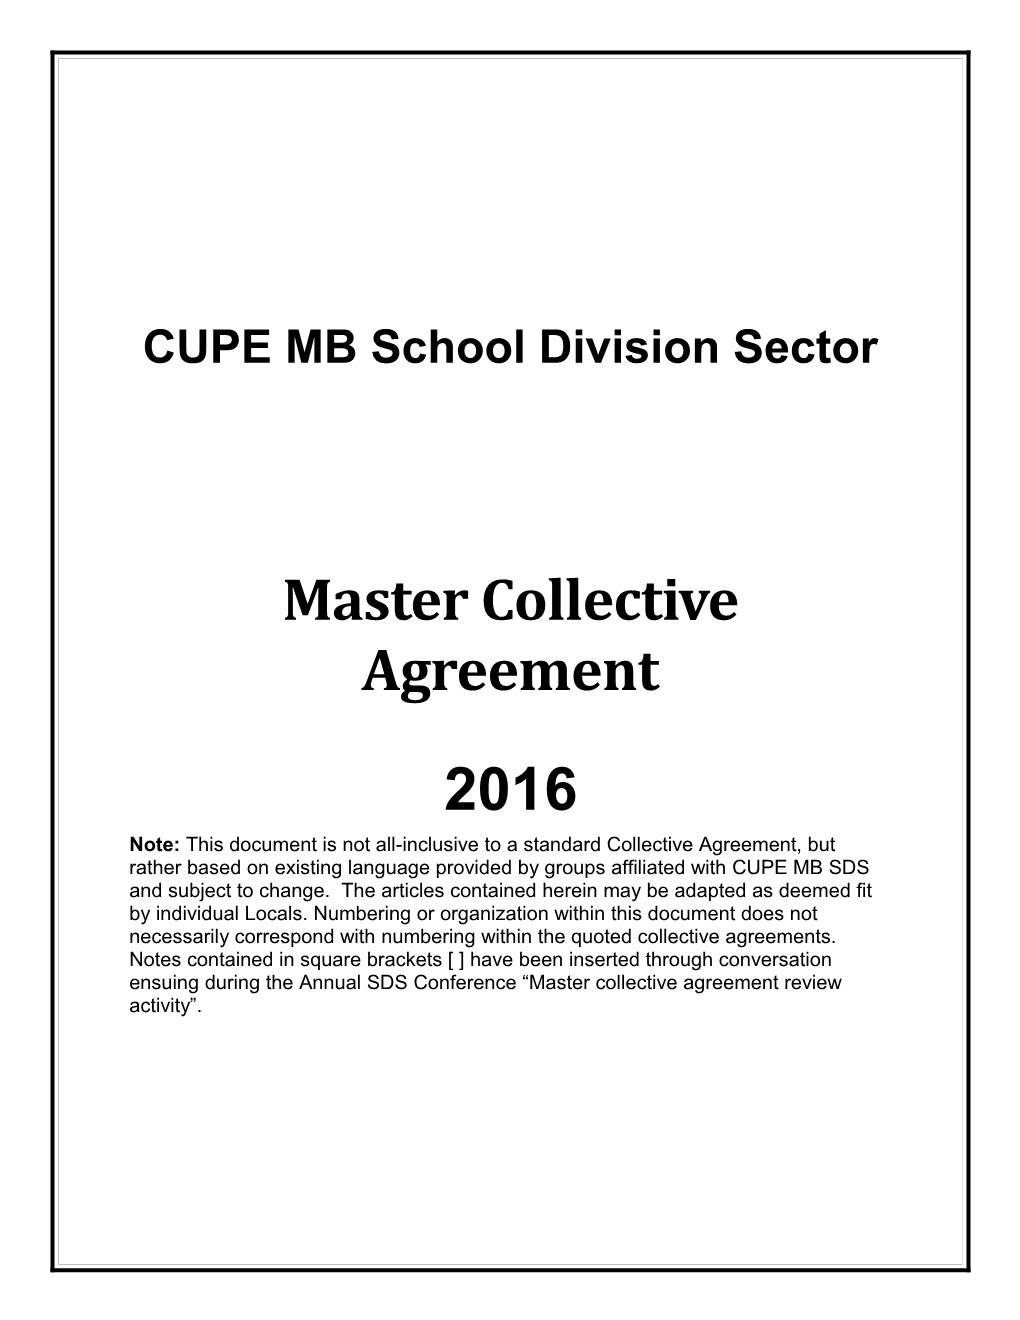 CUPE MB School Division Sector